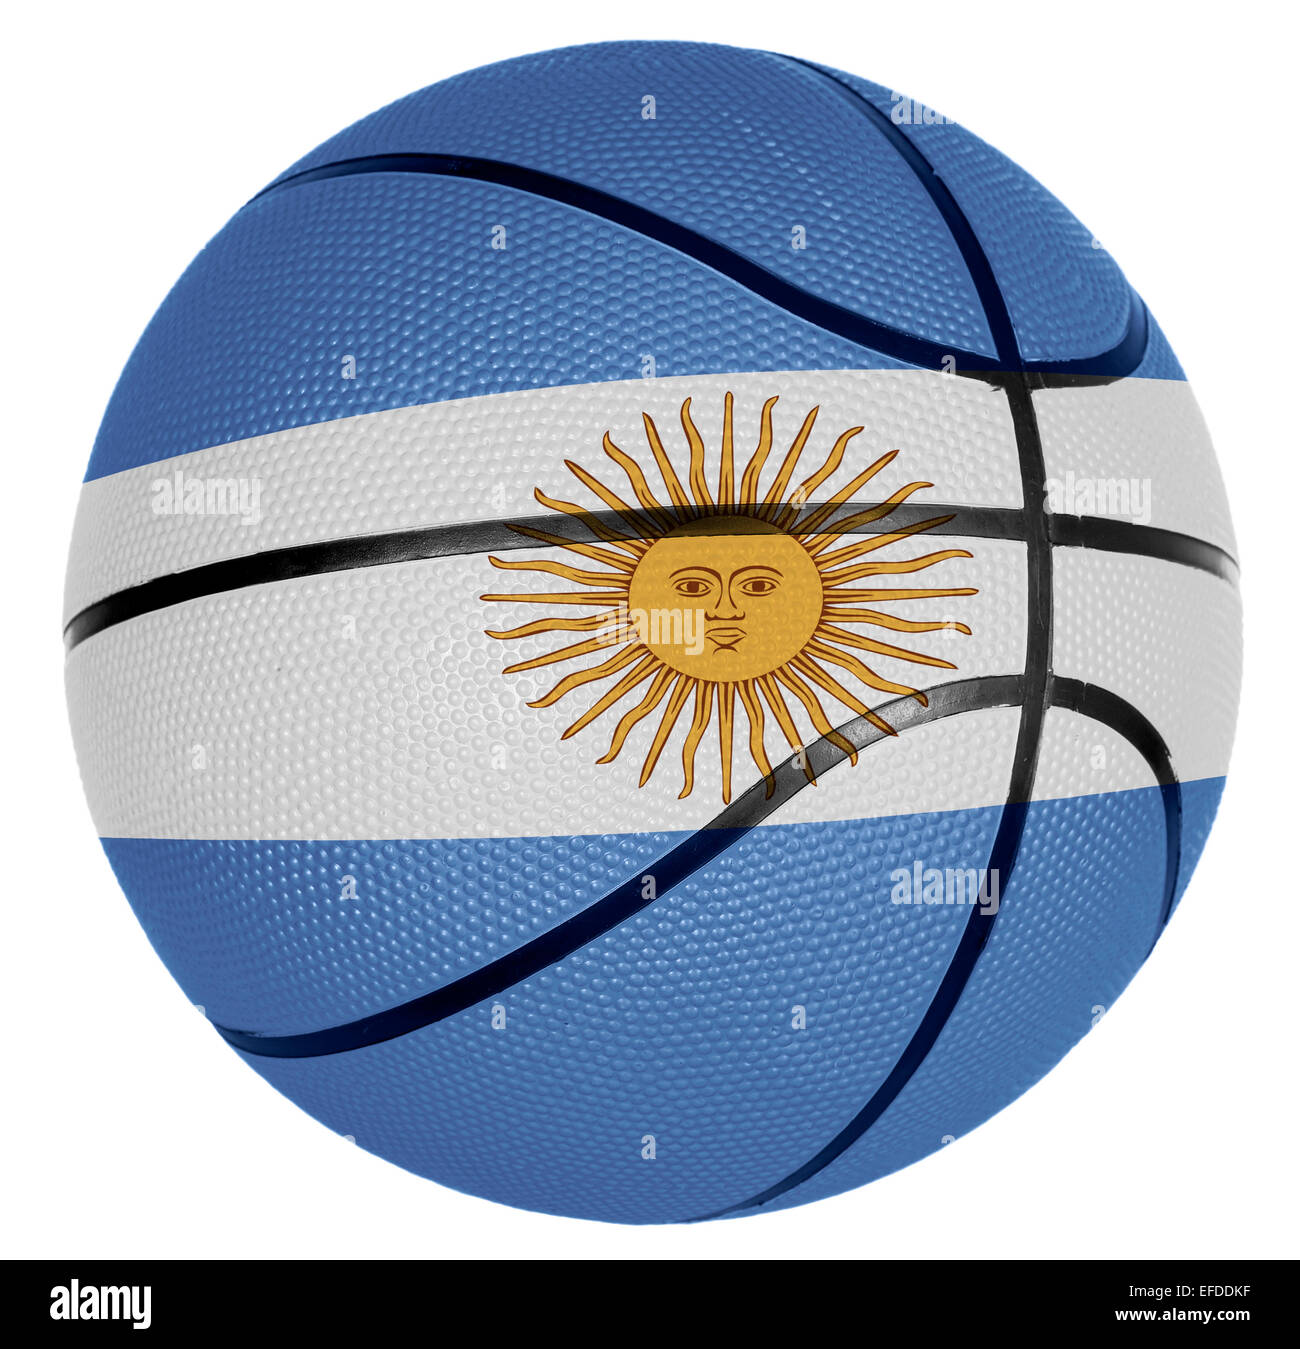 Ball with flag of Argentina for basketball game Stock Photo